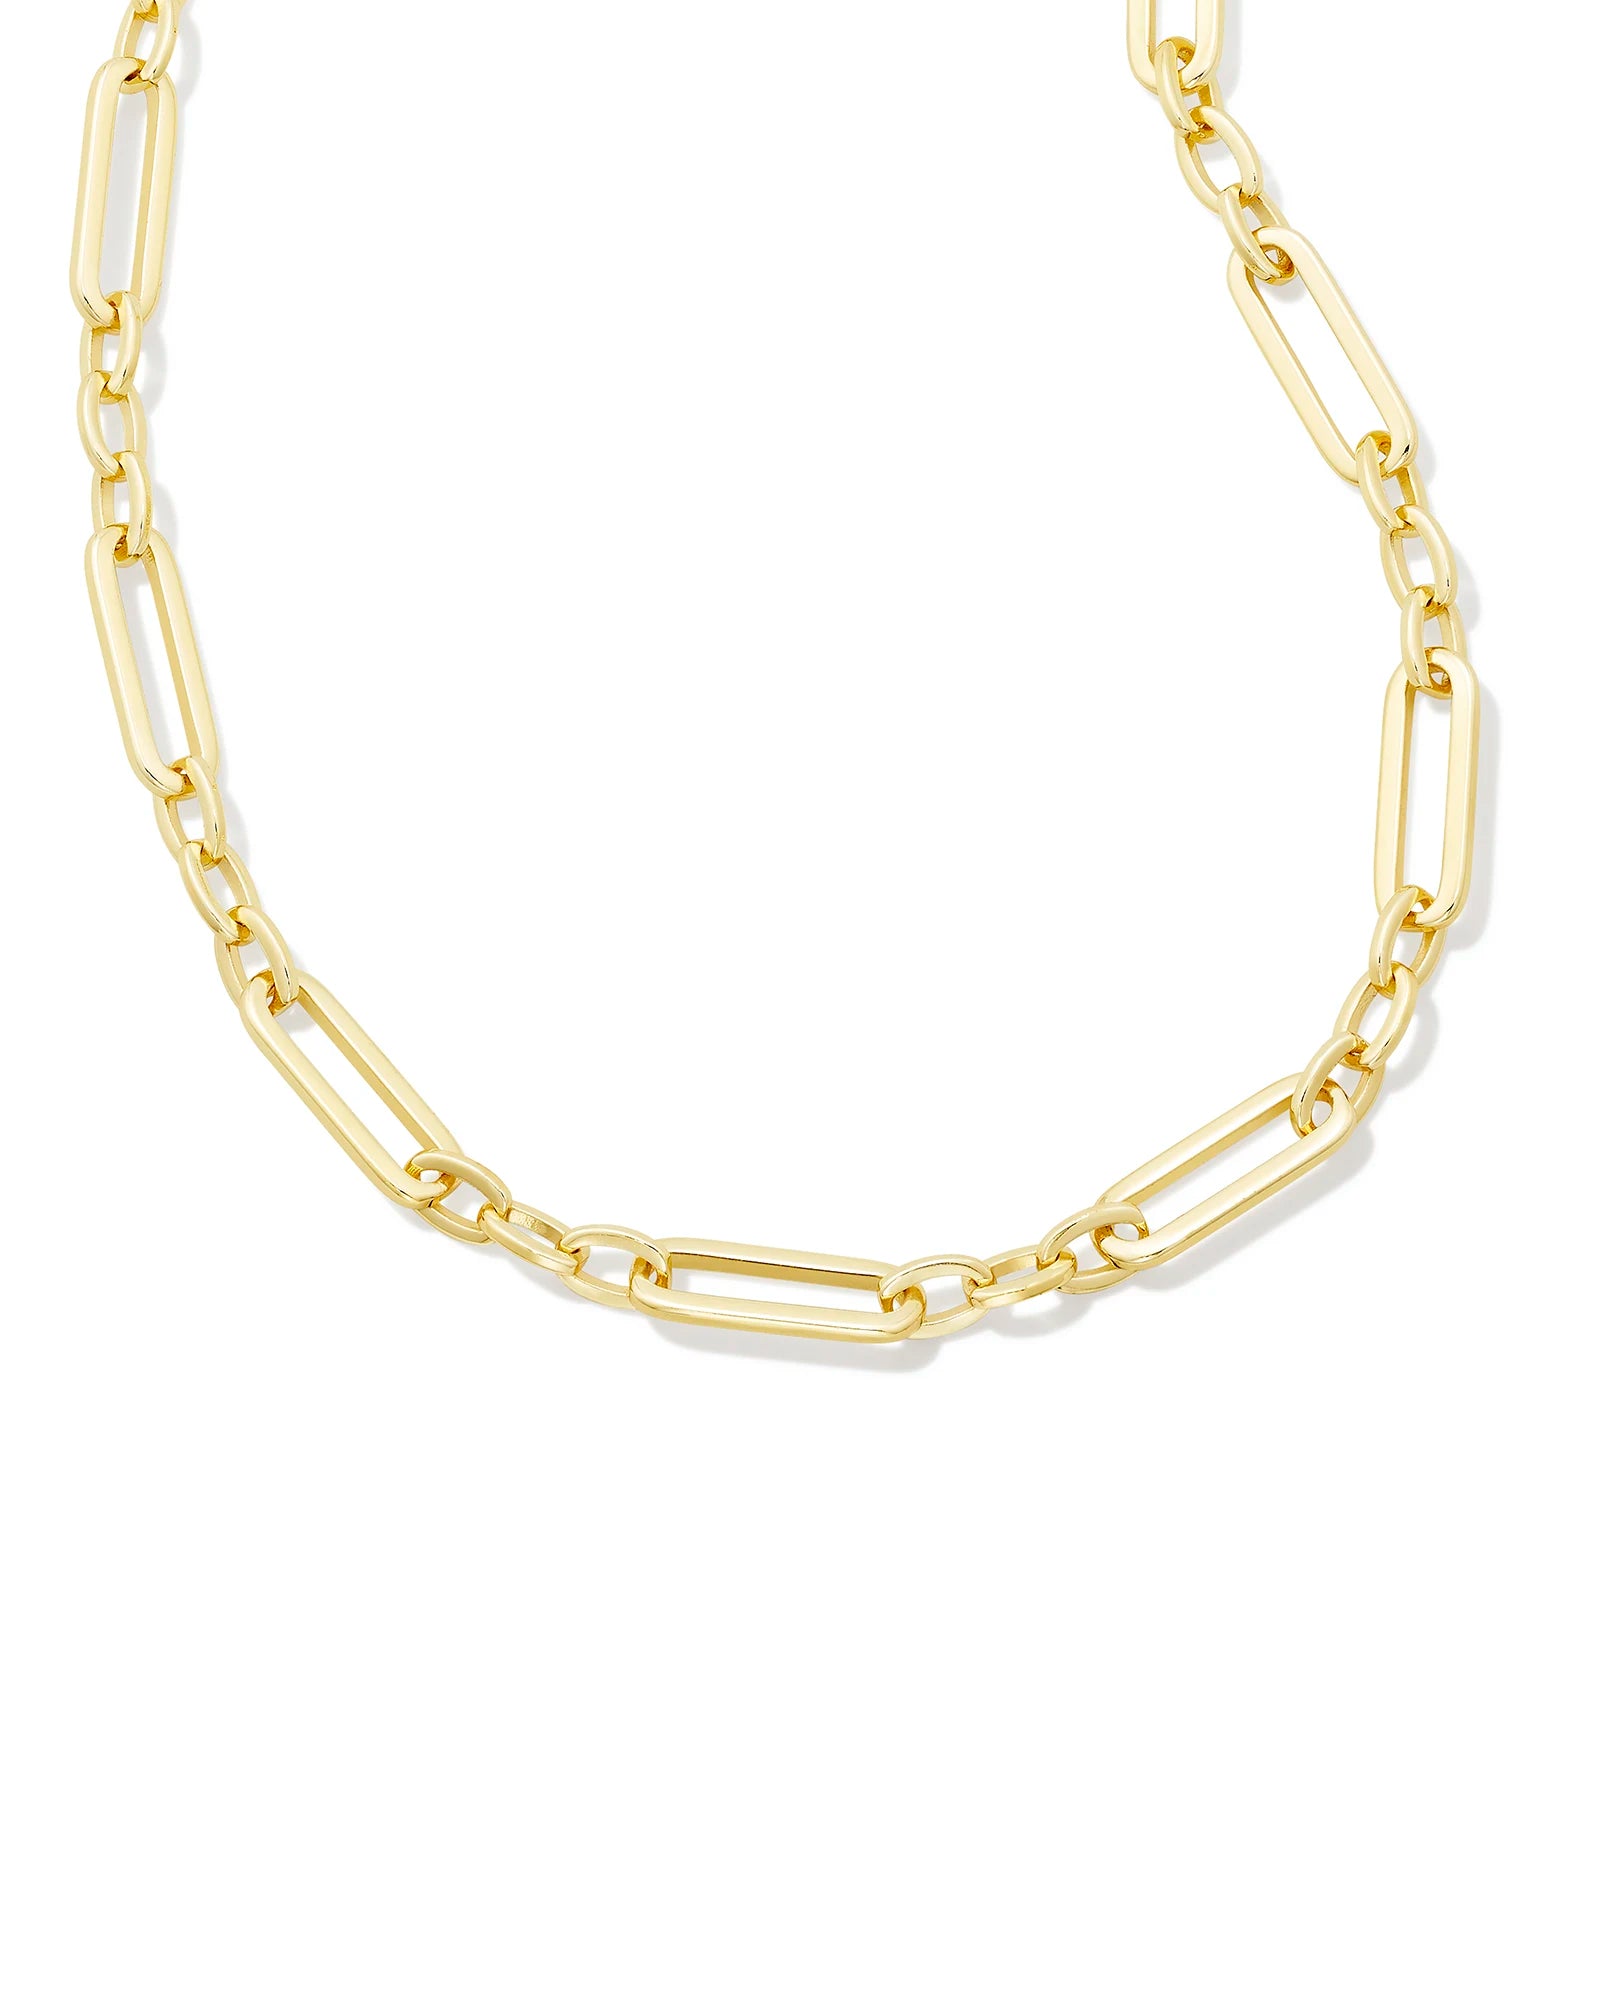  Kendra Scott Korinne Chain Bracelet in 14k Gold-Plated Brass:  Clothing, Shoes & Jewelry